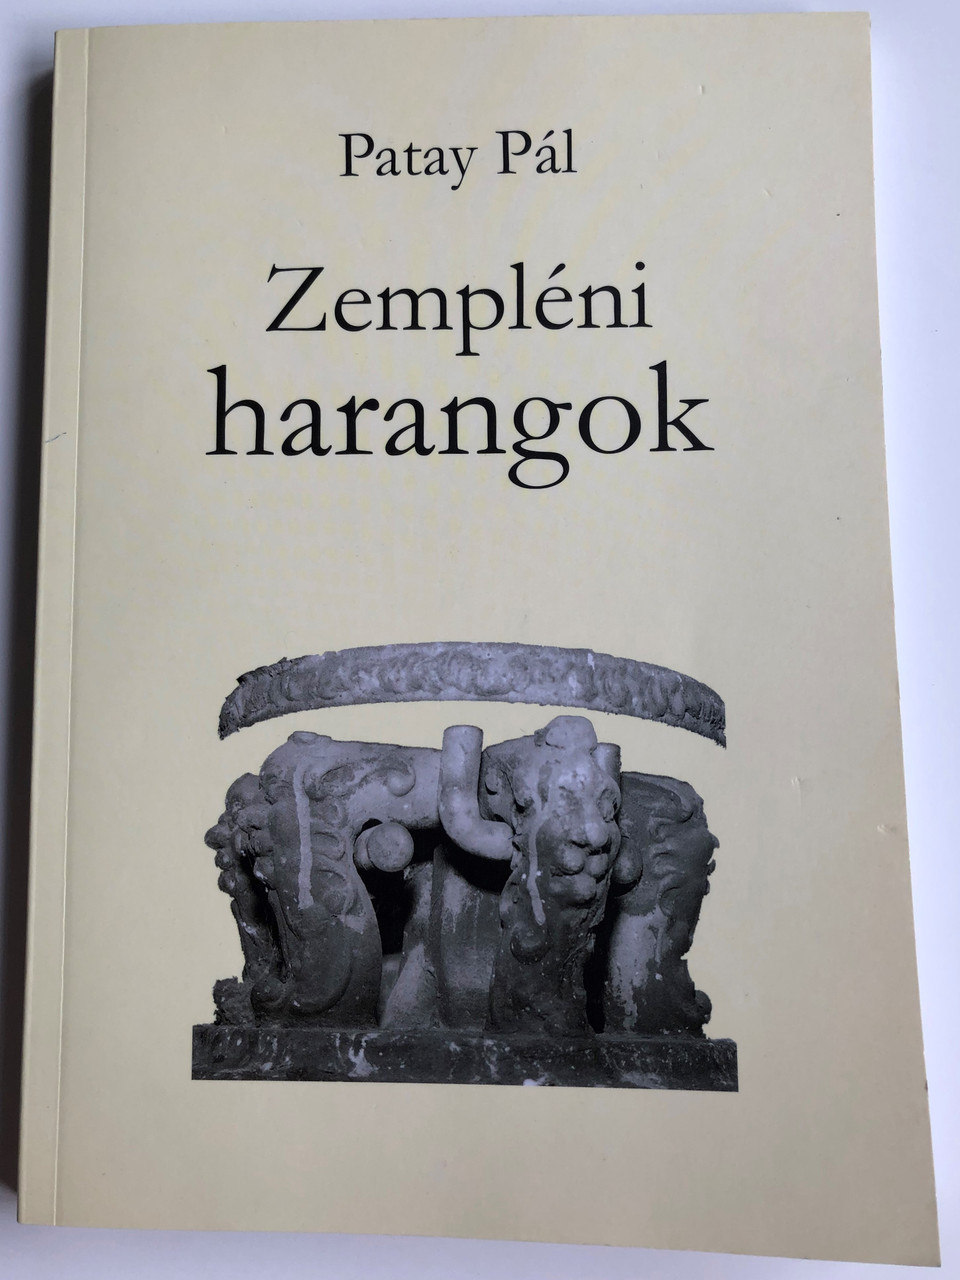 Zempléni harangok by Patay Pál / Officina Musei 18. / Paperback 2009 /  Translated by Friedrich Albrecht / Hungarian National Museum / Herman Otto  Museum - bibleinmylanguage